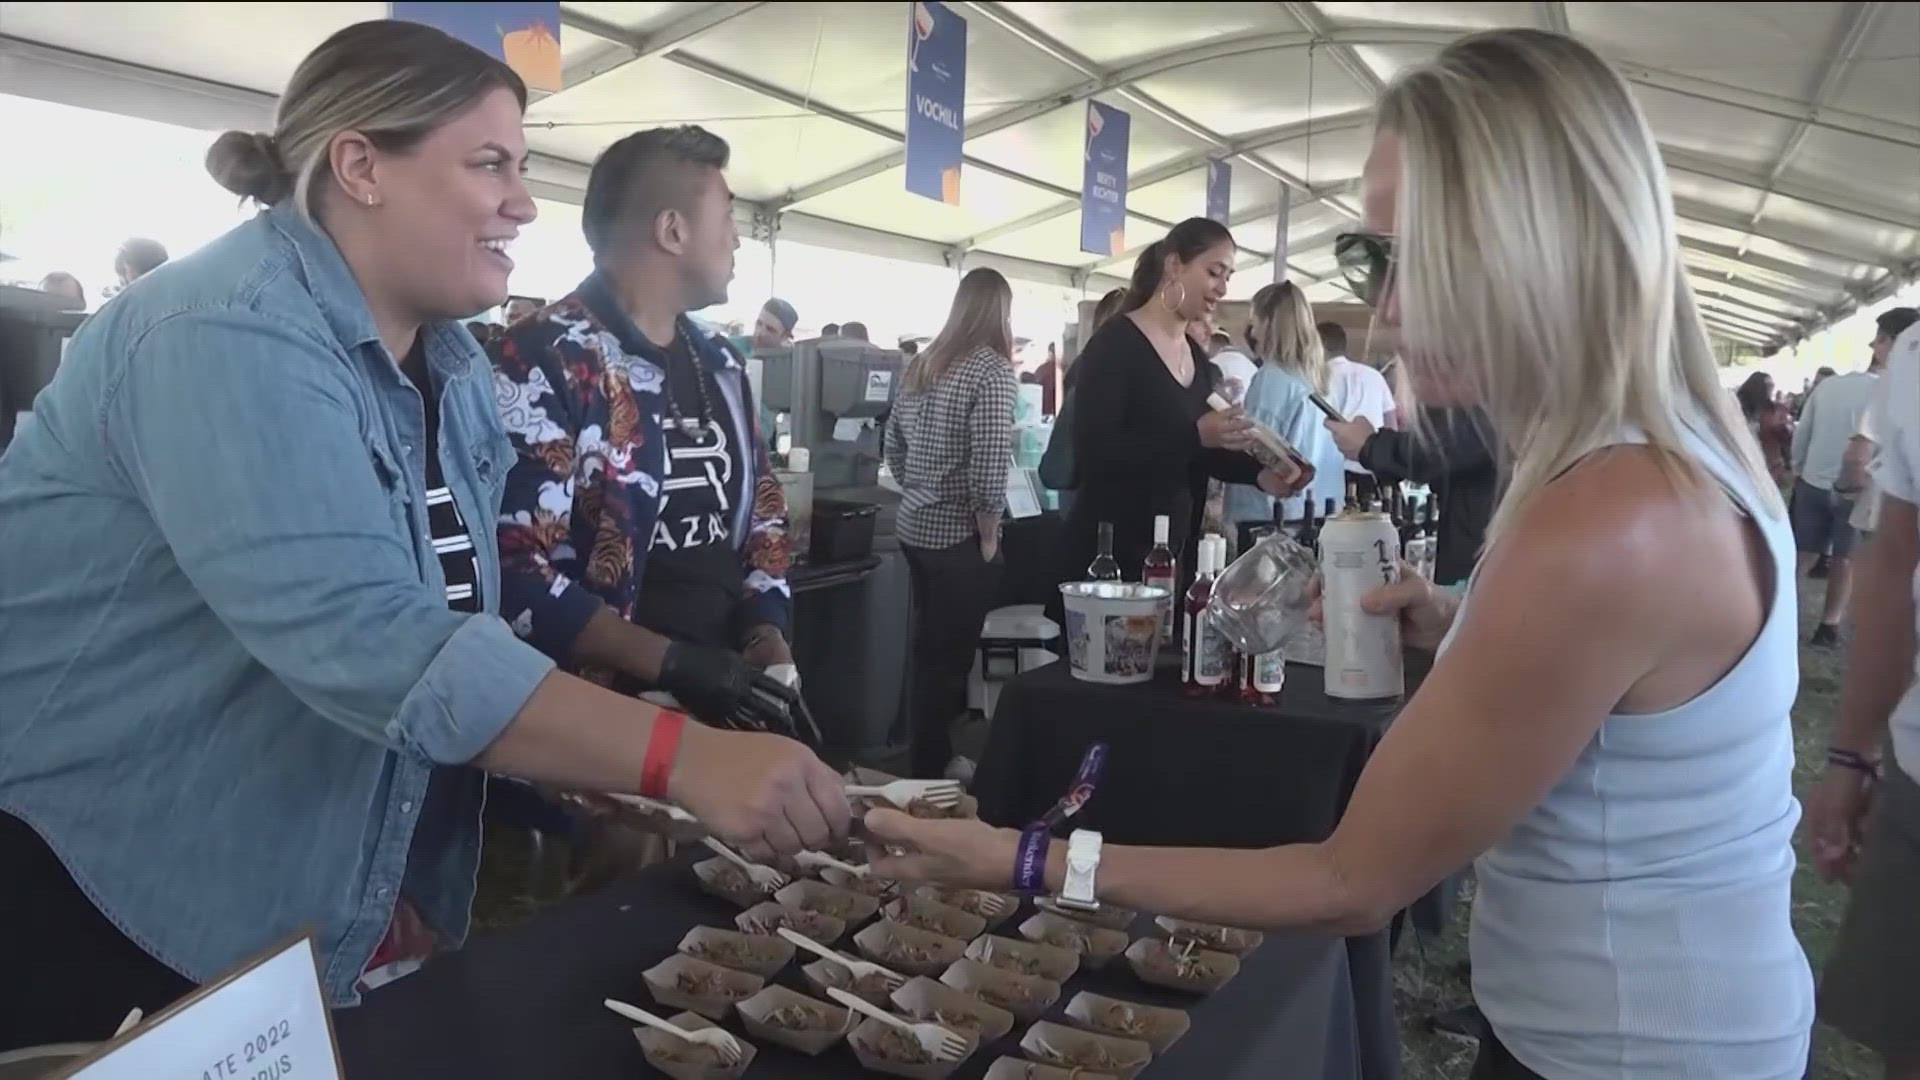 The Austin Food and Wine Festival has returned to Auditorium Shores. The two-day event is filled with wine paired with small bites from renowned chefs.